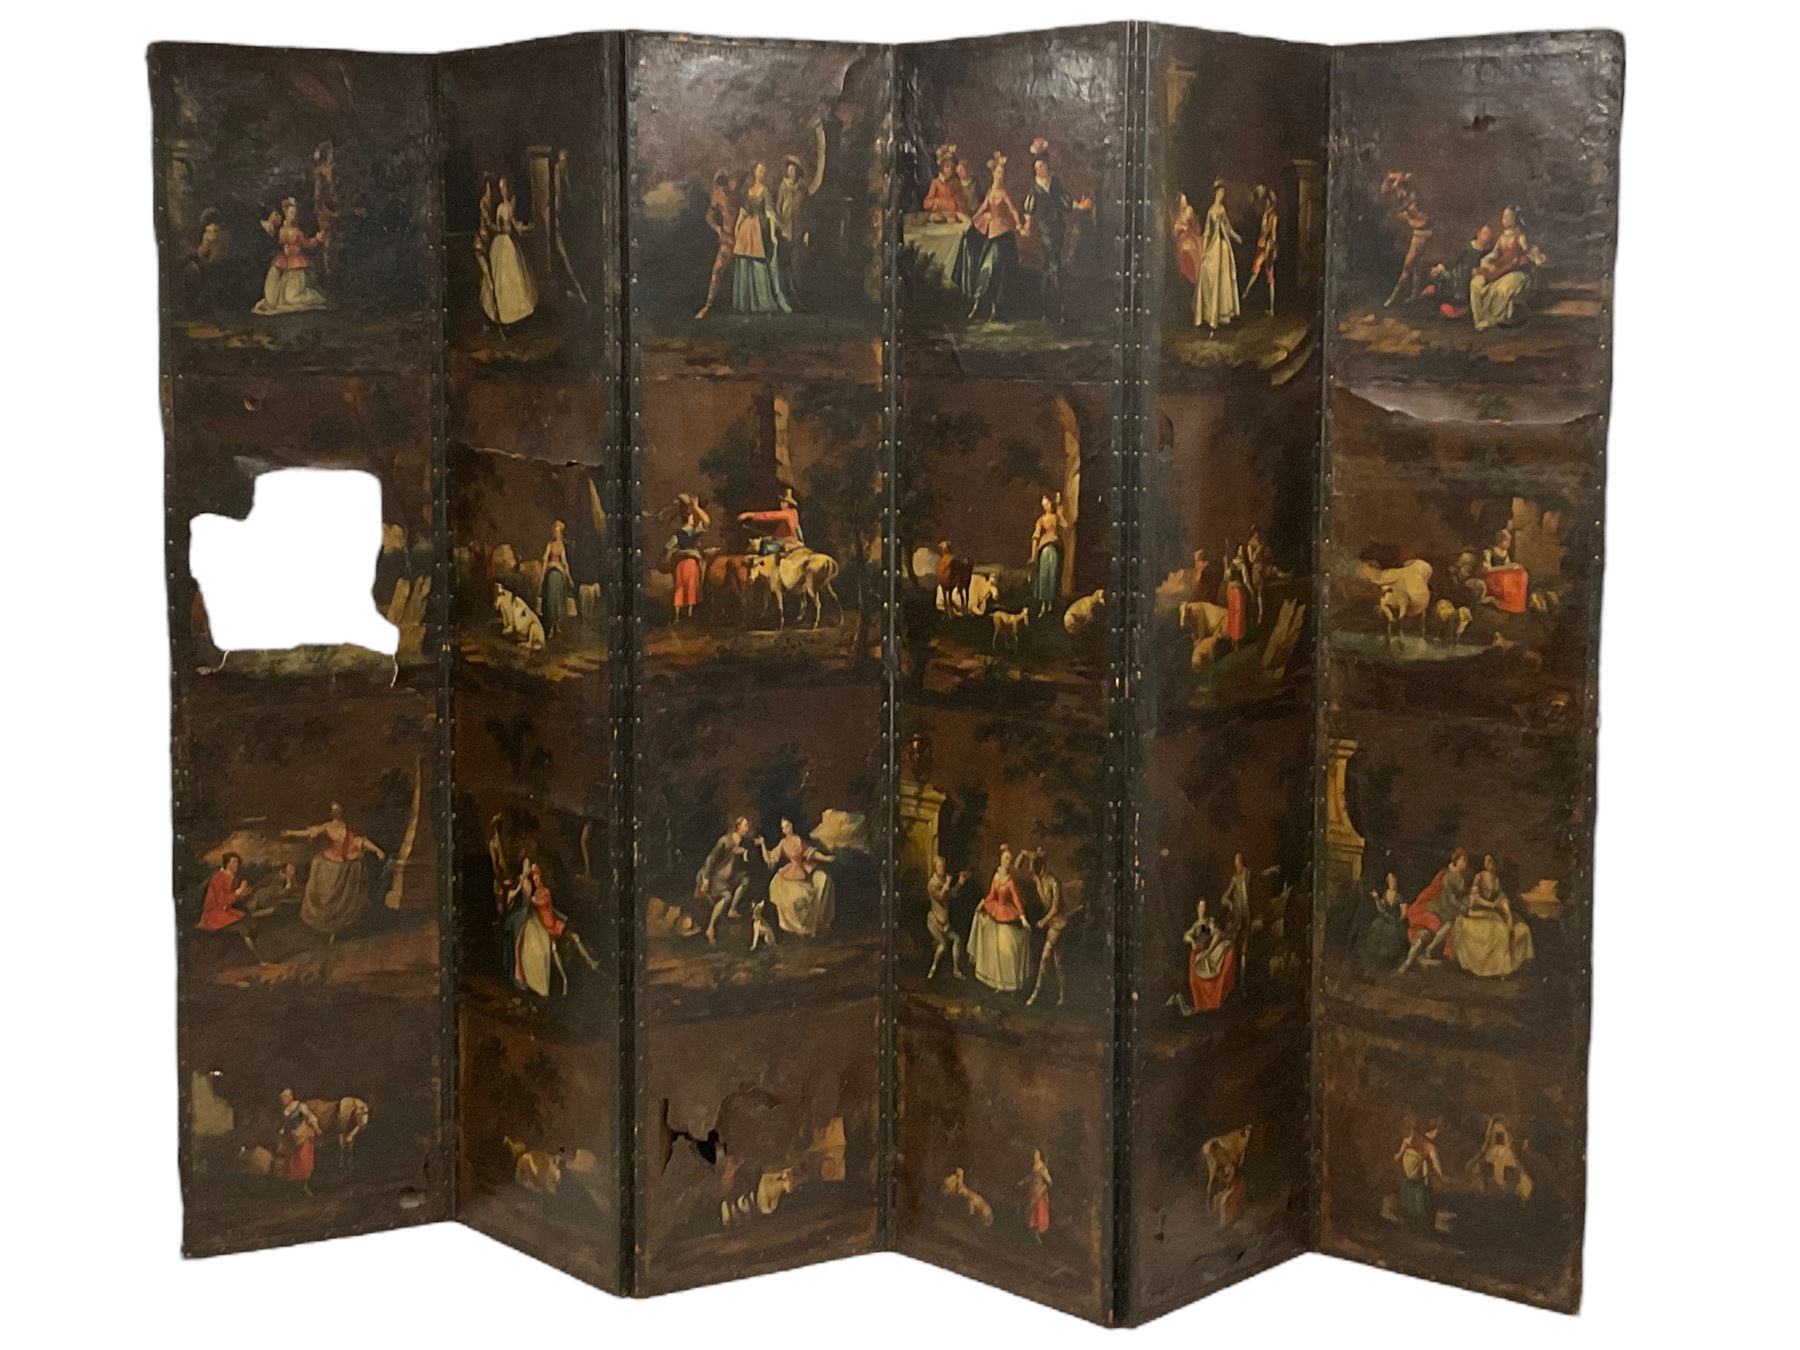 Late 18th century Dutch painted leather six panel screen - Image 2 of 16